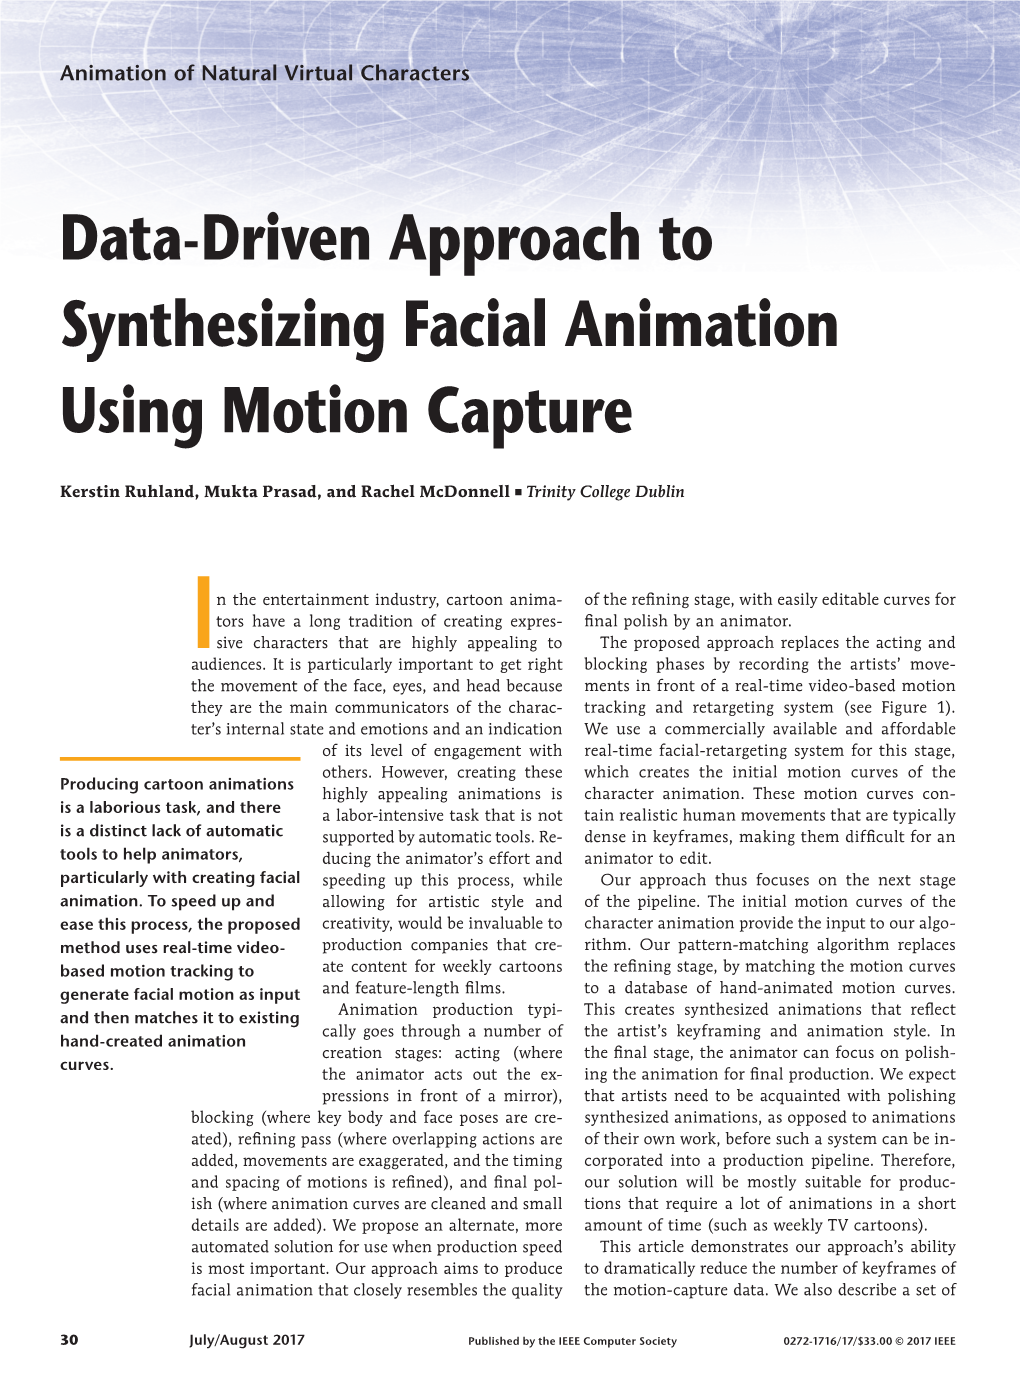 Data-Driven Approach to Synthesizing Facial Animation Using Motion Capture